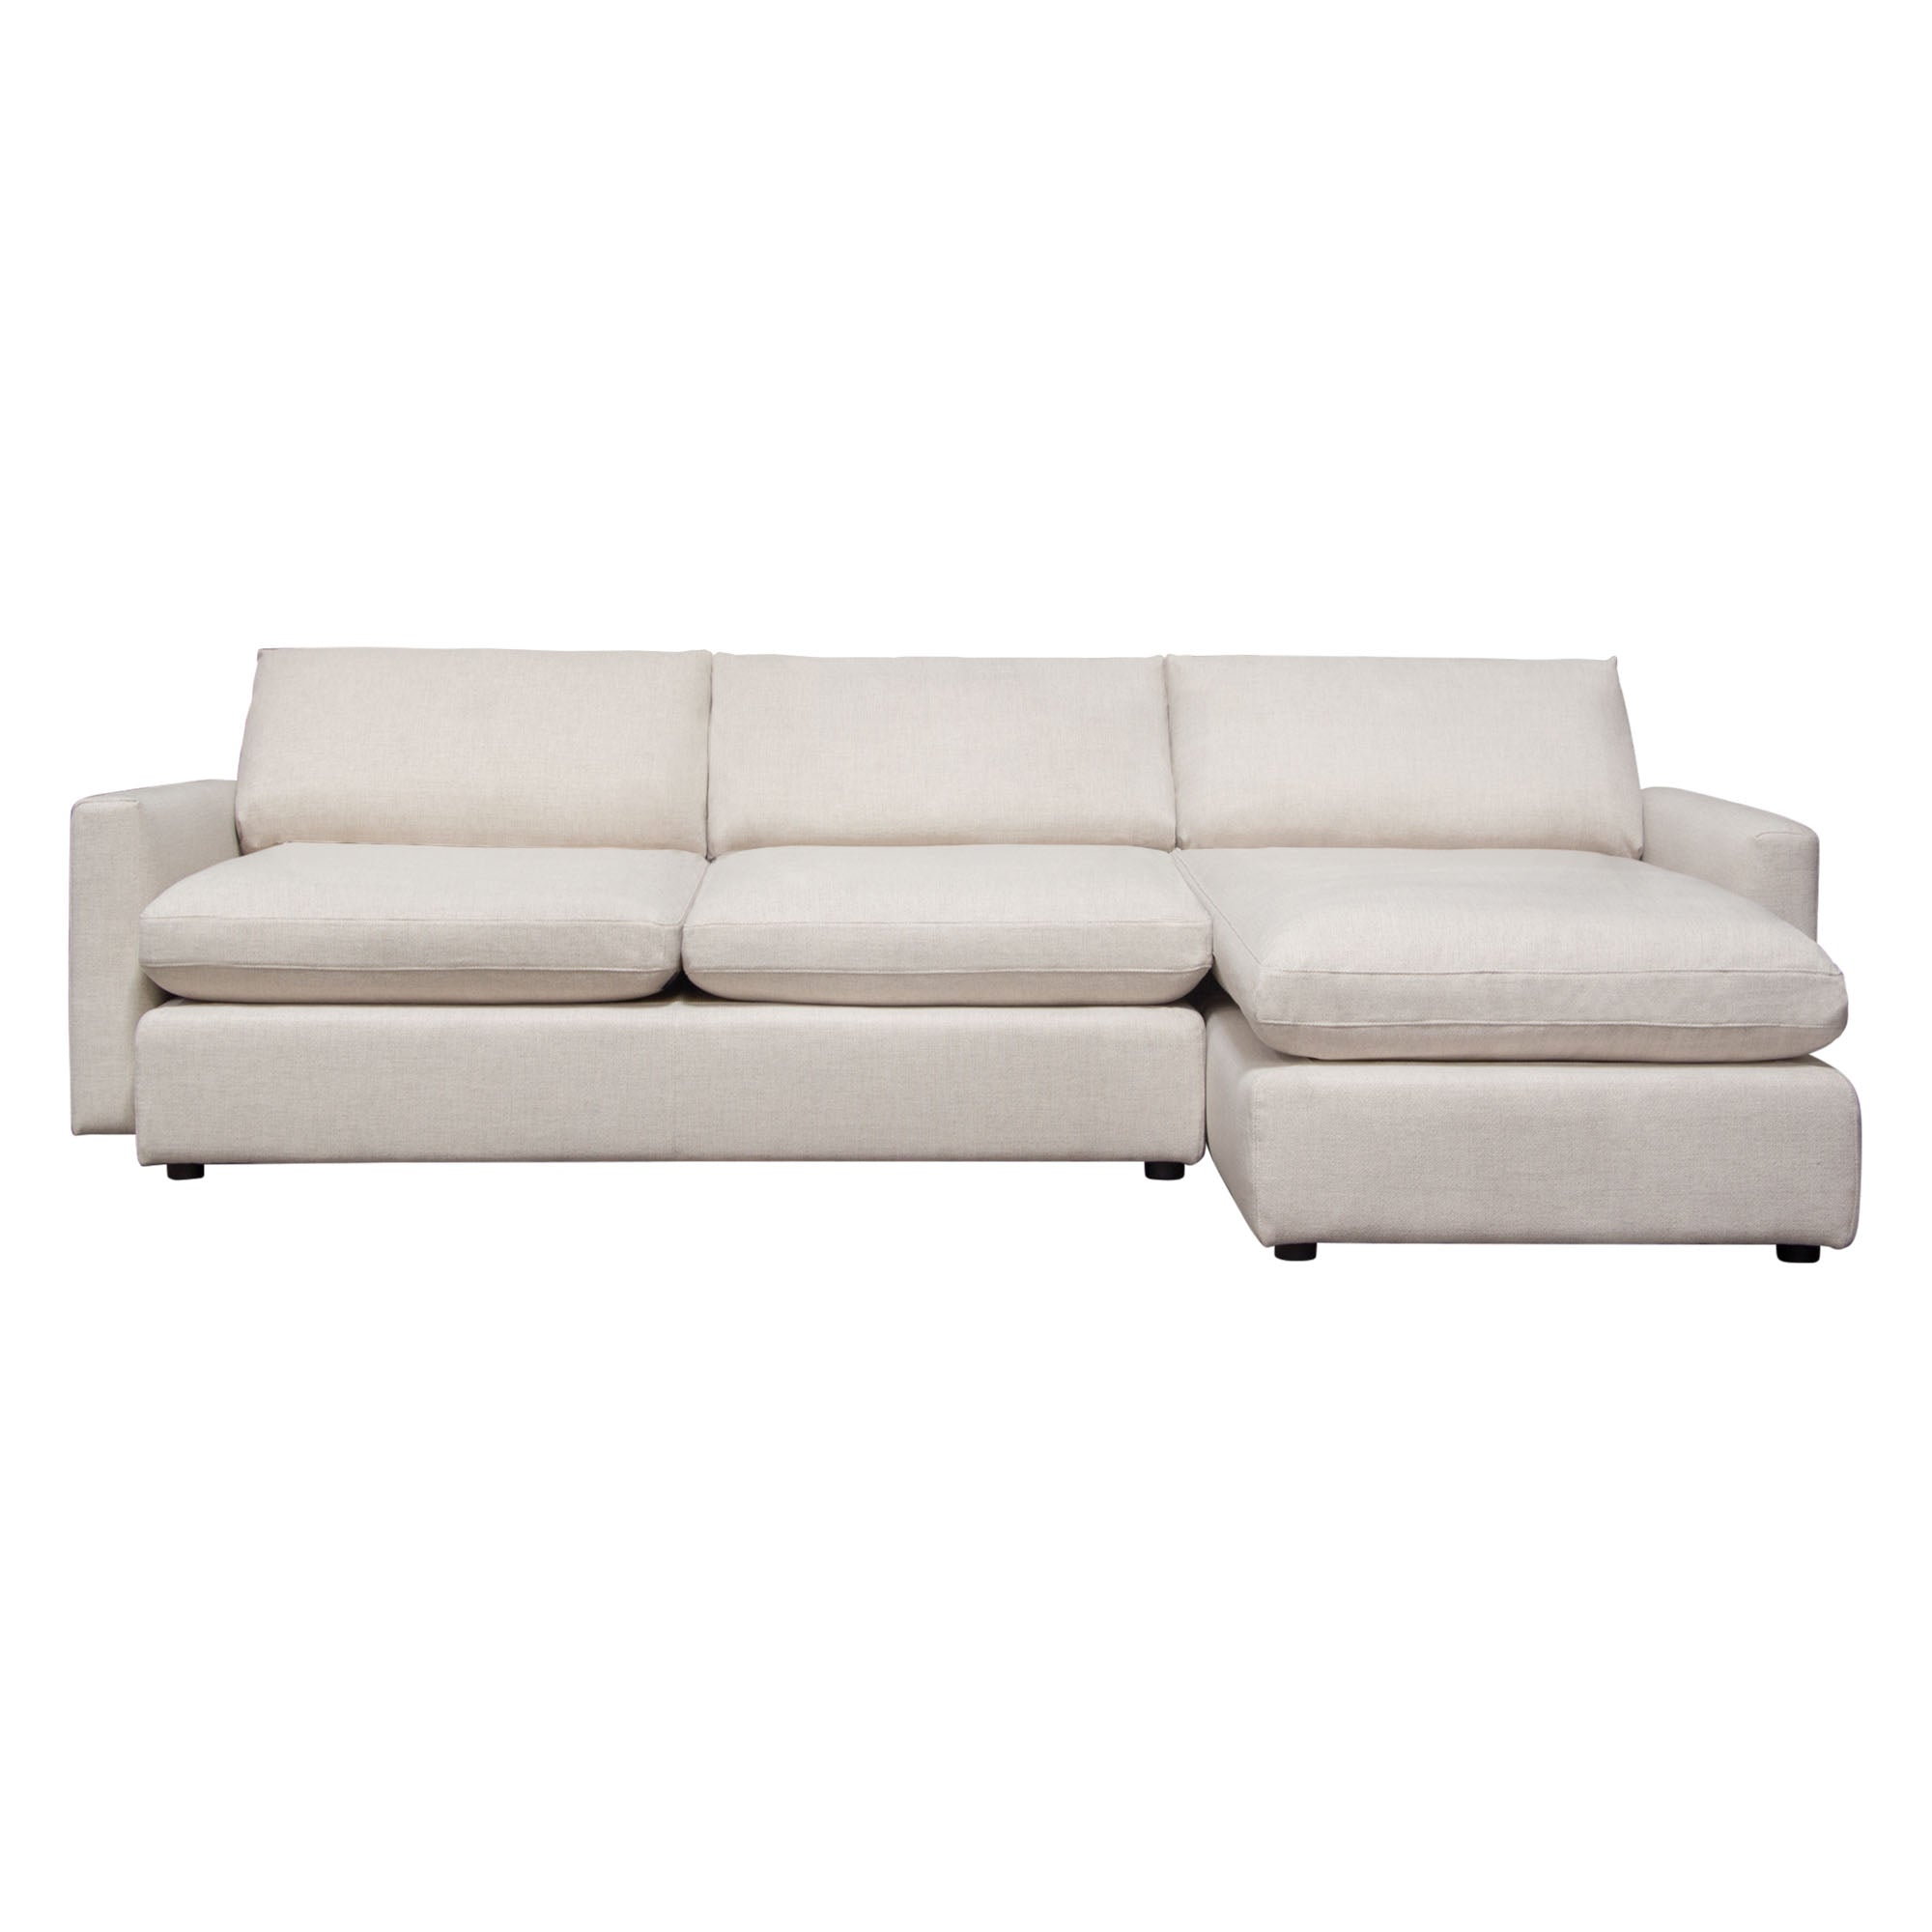 Arcadia 2 Piece Reversible Sectional